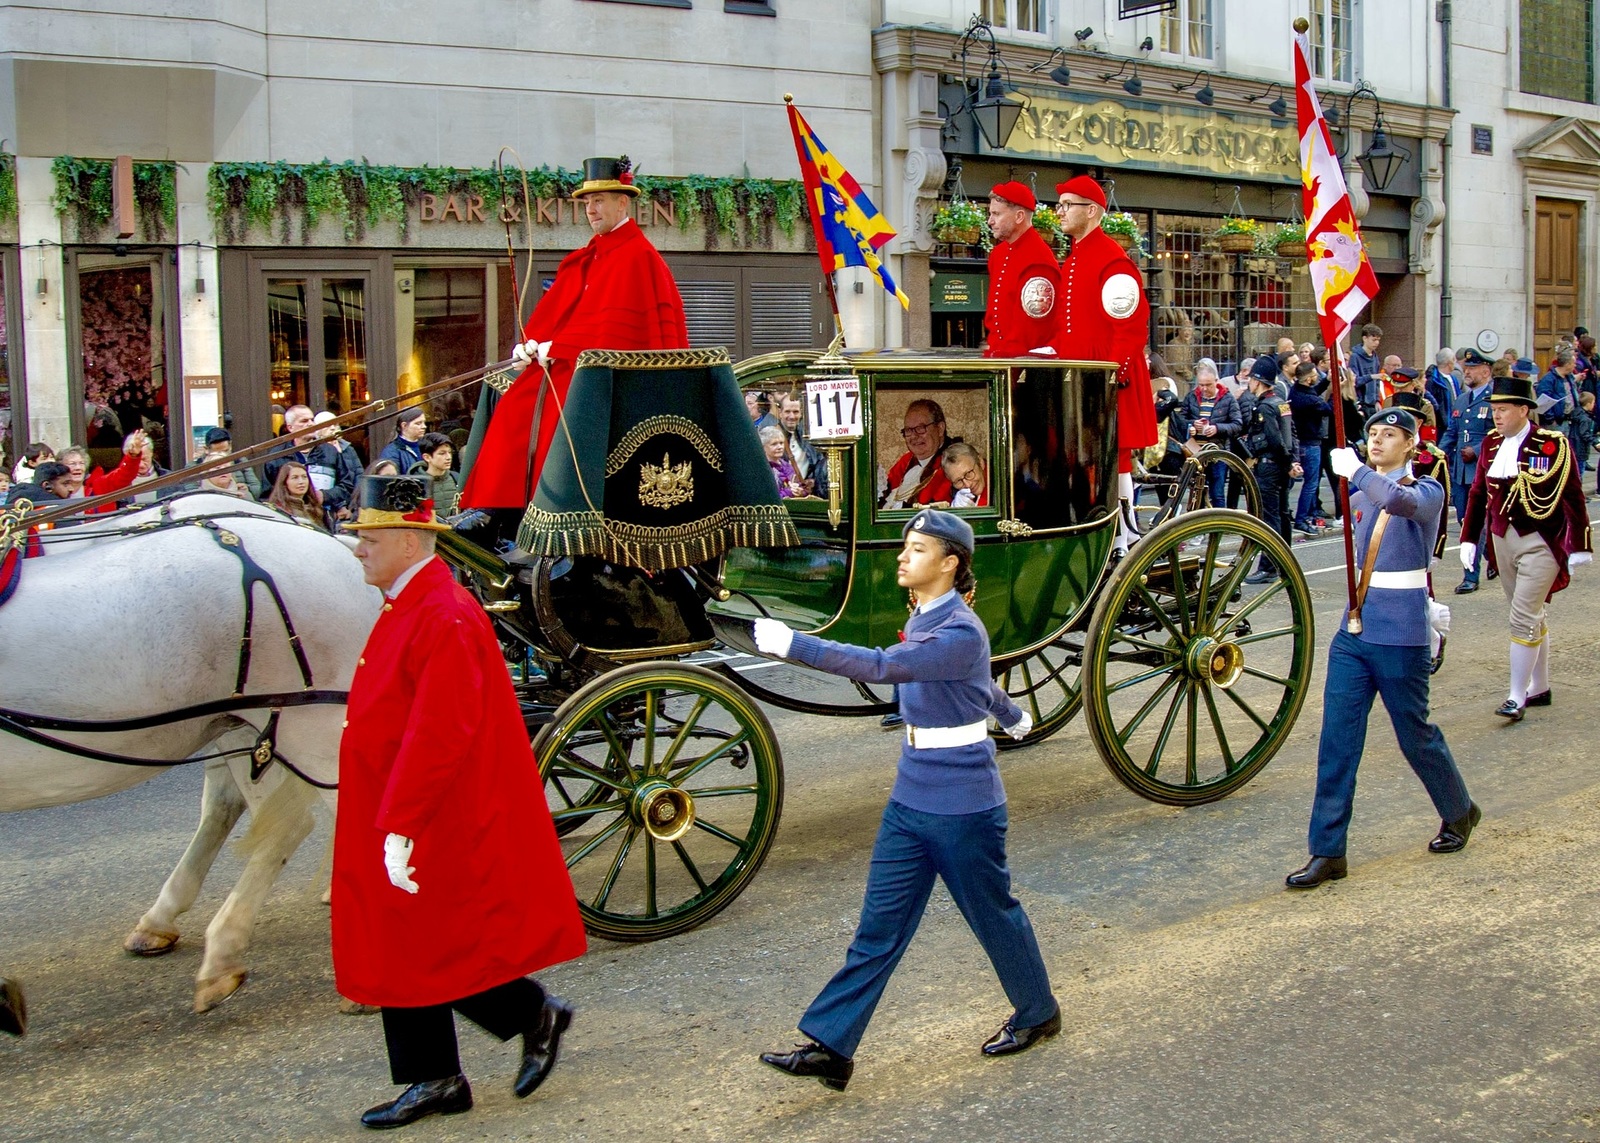 12 Nov 22 - In the Lord Mayor’s Show with my Chaplain, Cannon Dr Alison Joyce